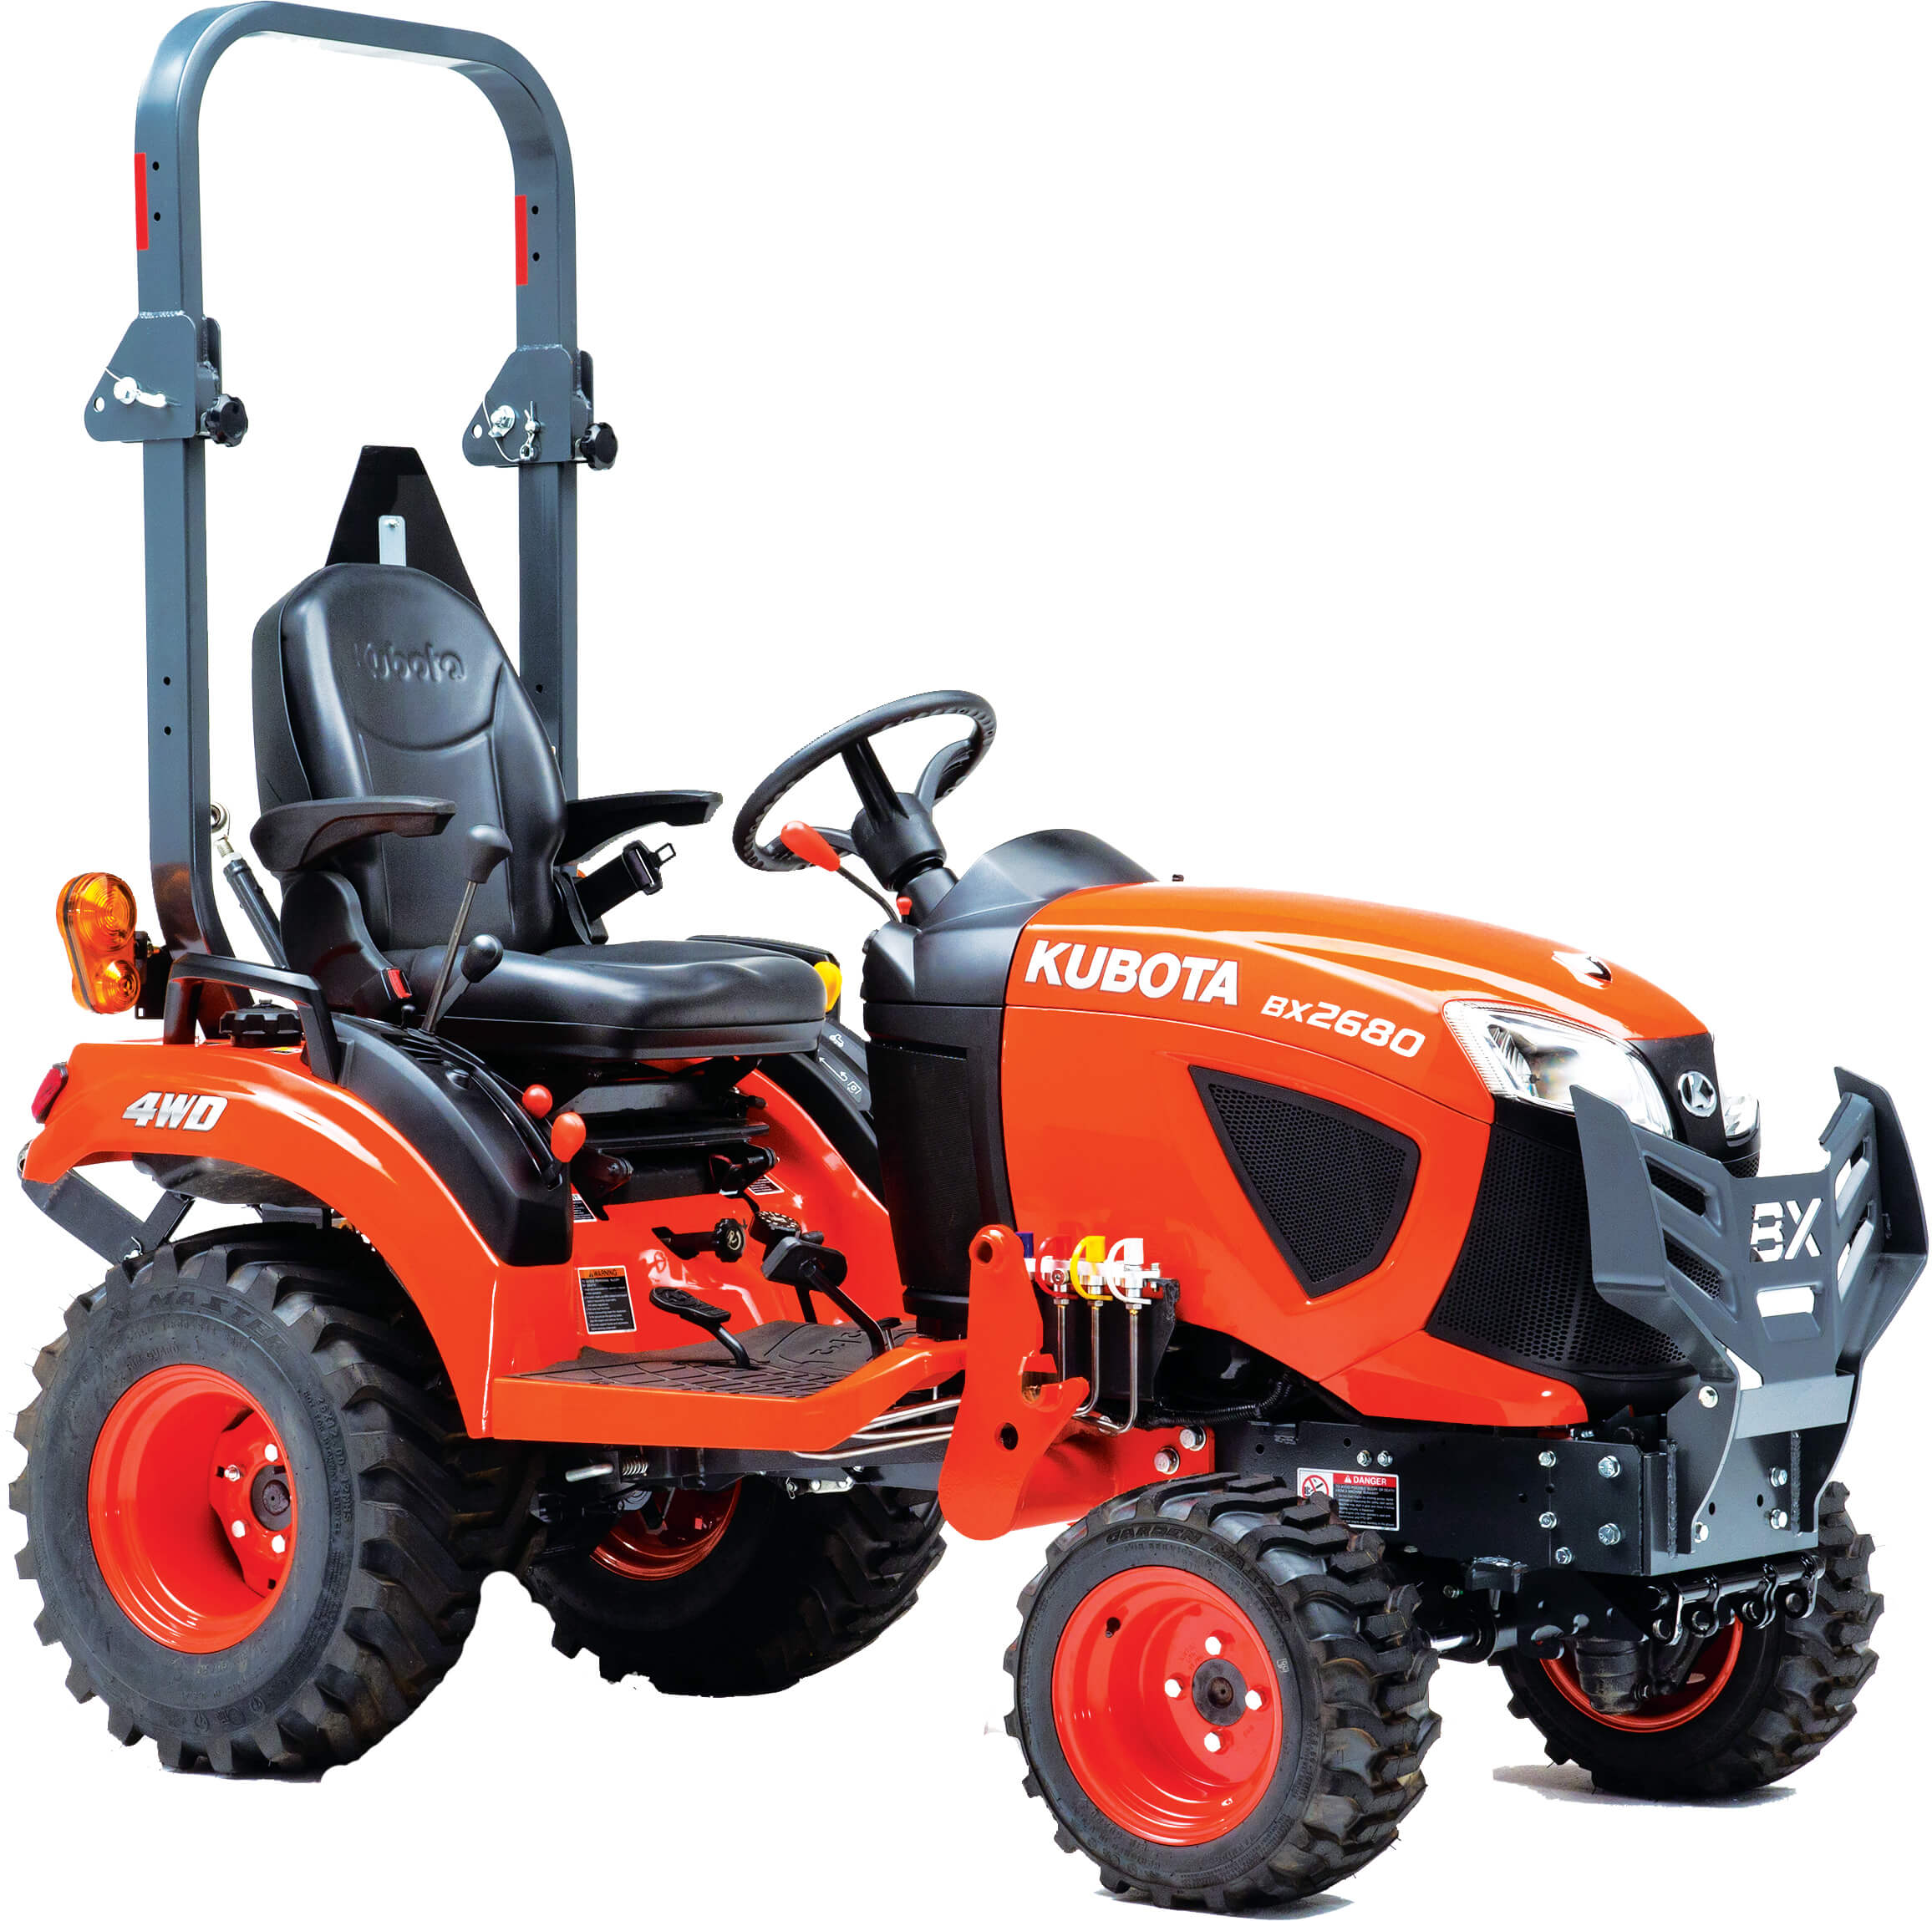 There’s a Kubota product for every job, every harvest and every task.